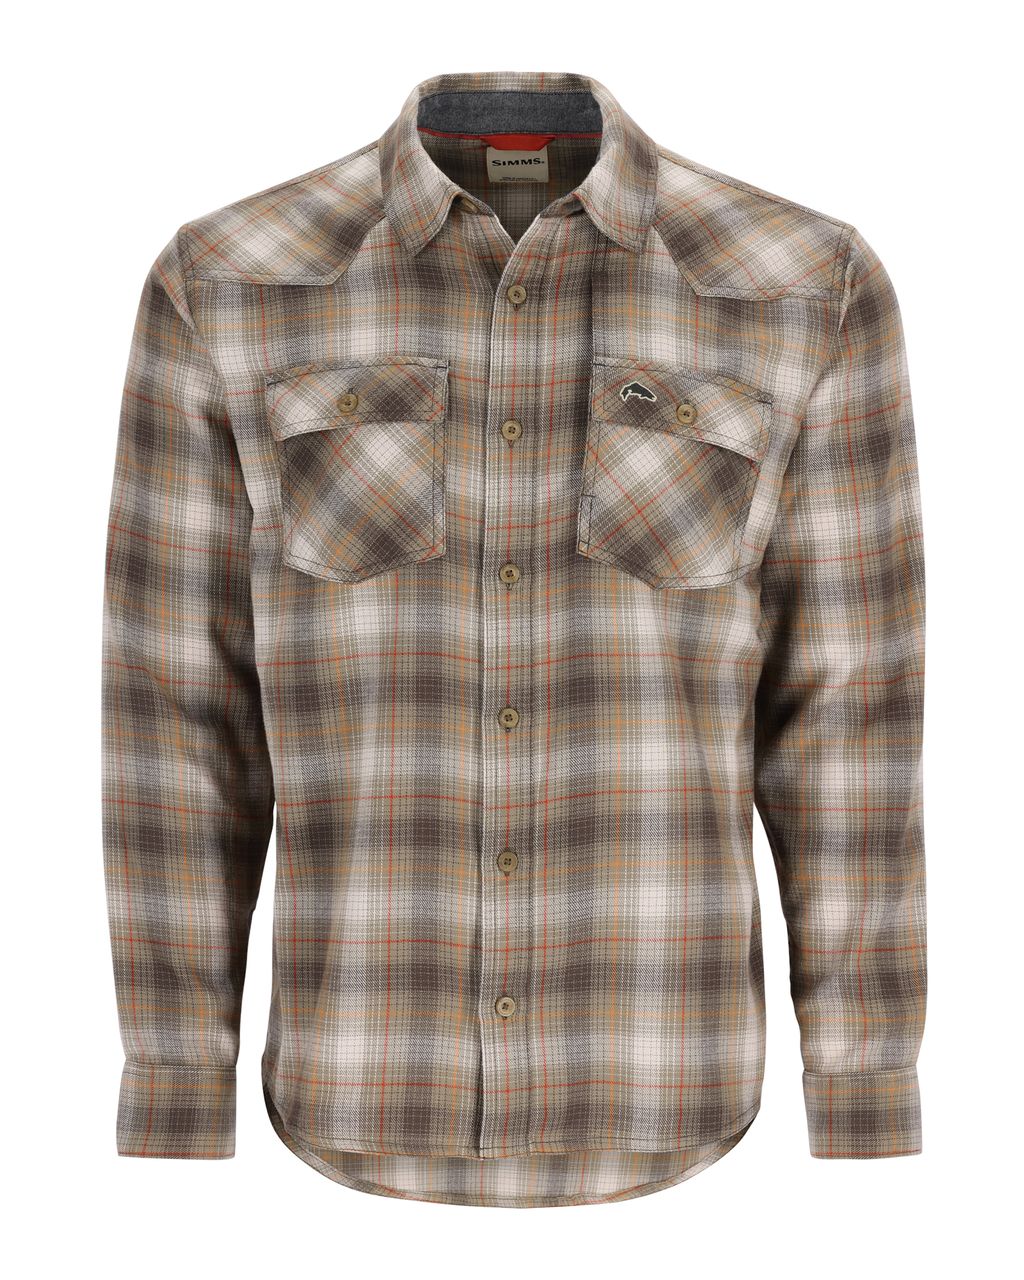 Simms Flannel Shirt Bayleaf/Sunglow Pane Ombre